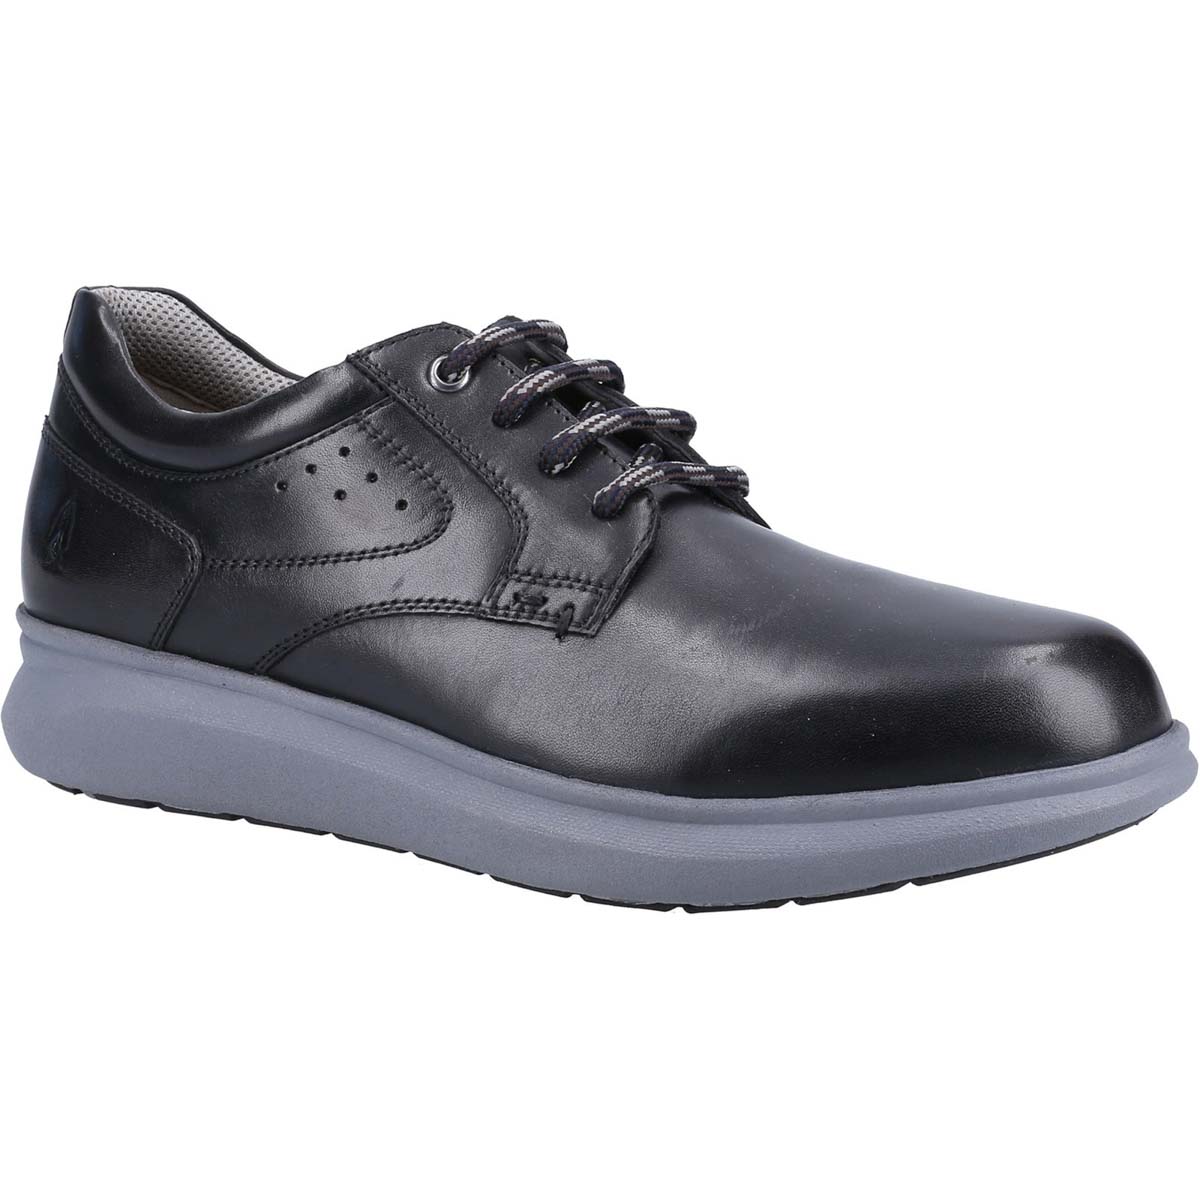 Hush Puppies Brett Black Mens fashion shoes 36668-68480 in a Plain Leather in Size 10